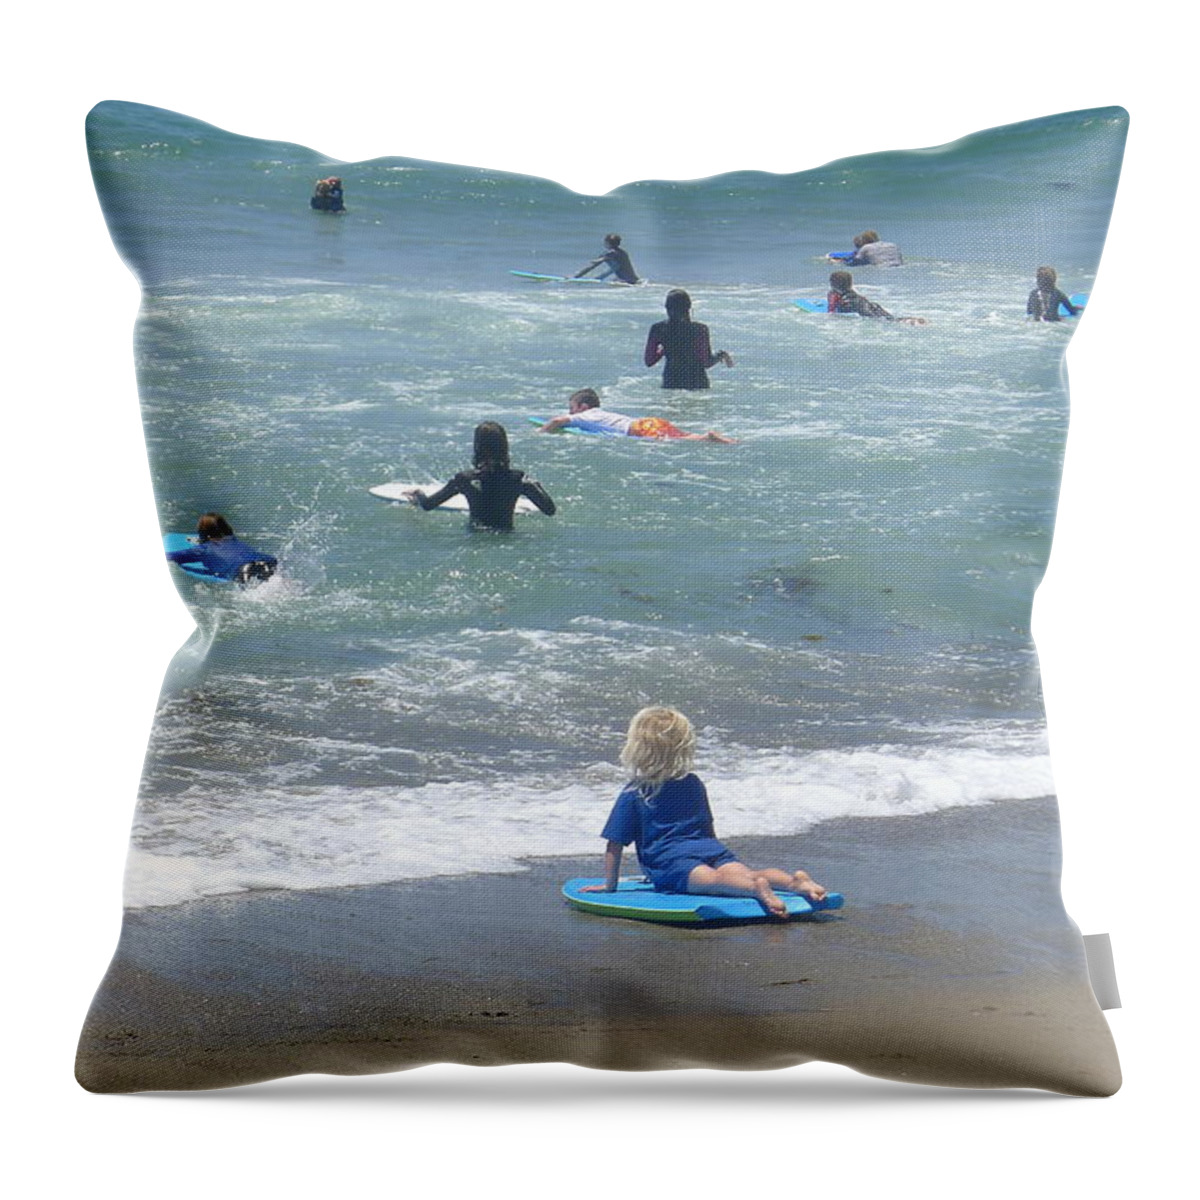  Throw Pillow featuring the photograph Zuma - Surf Camp 4 by Nora Boghossian